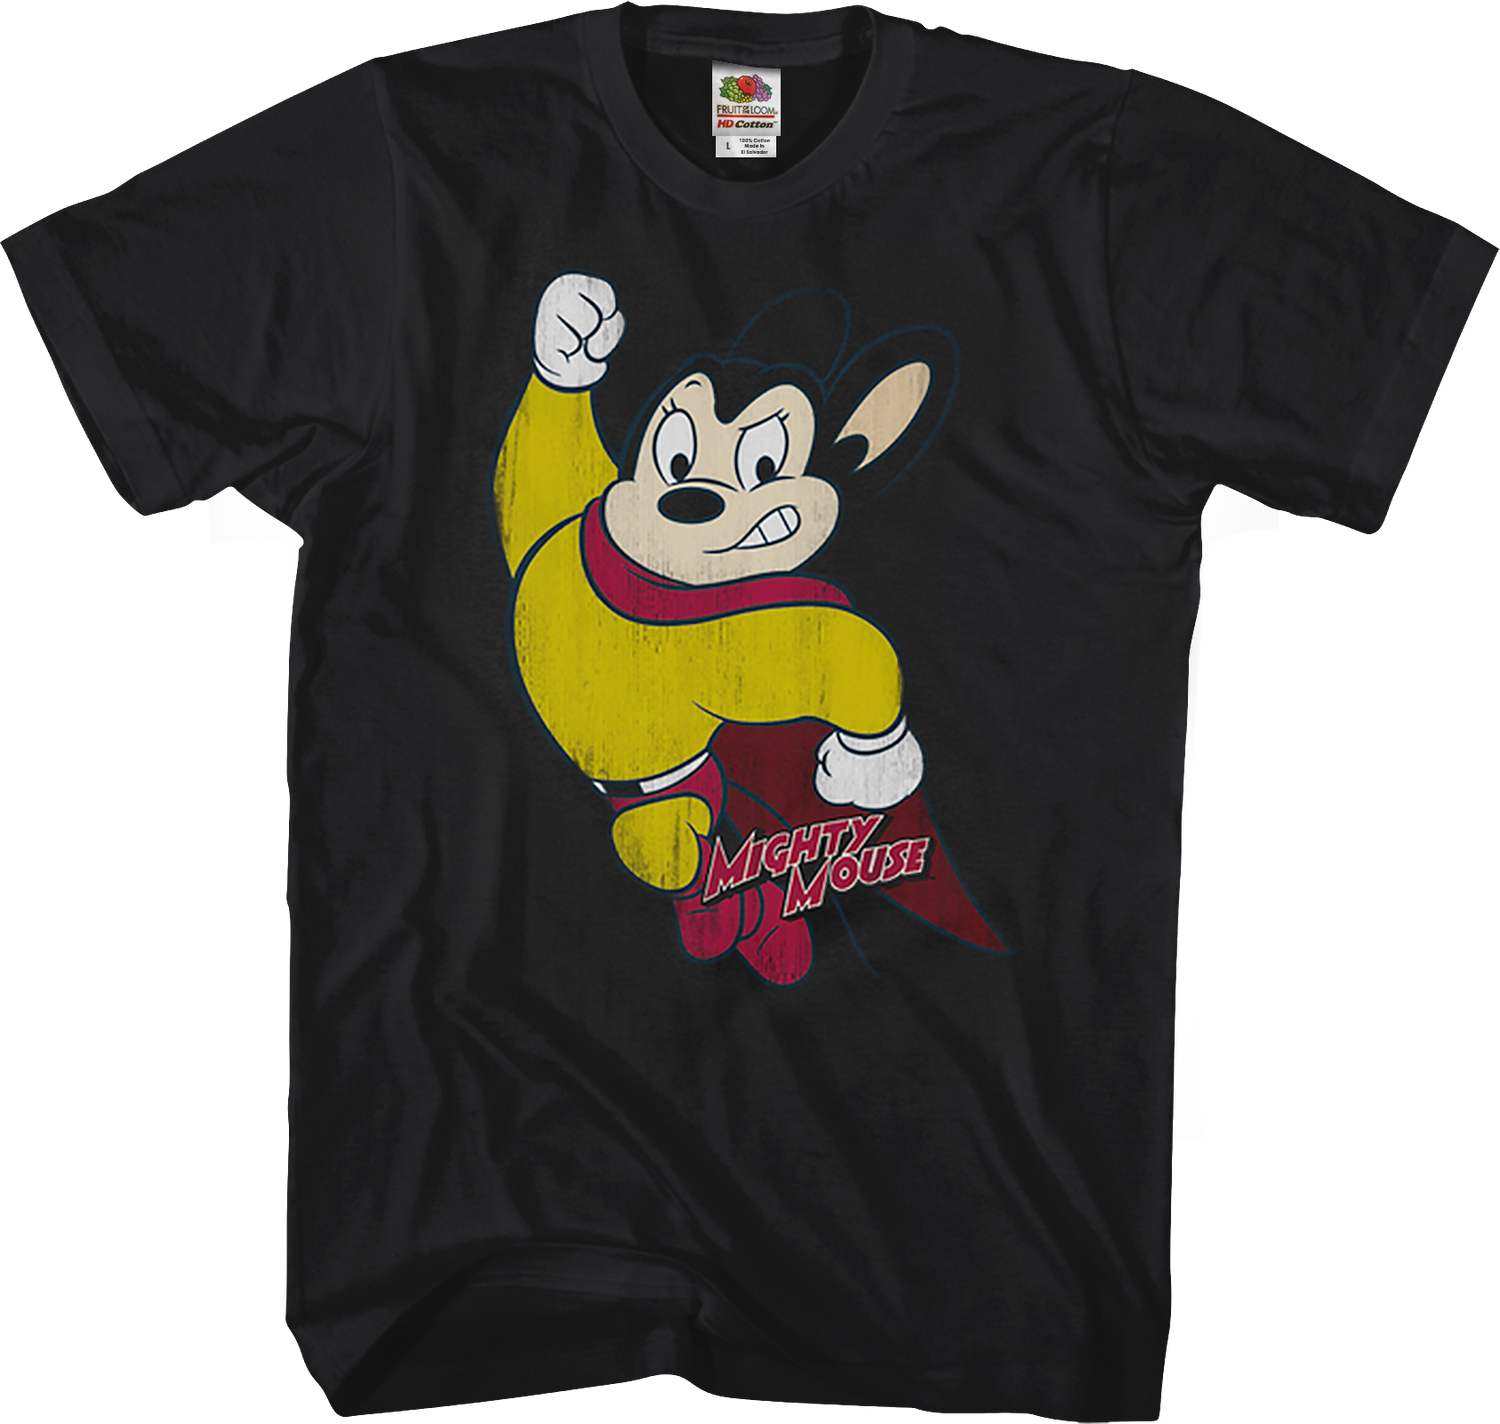 Heroic Pose Mighty Mouse T-Shirt Men's